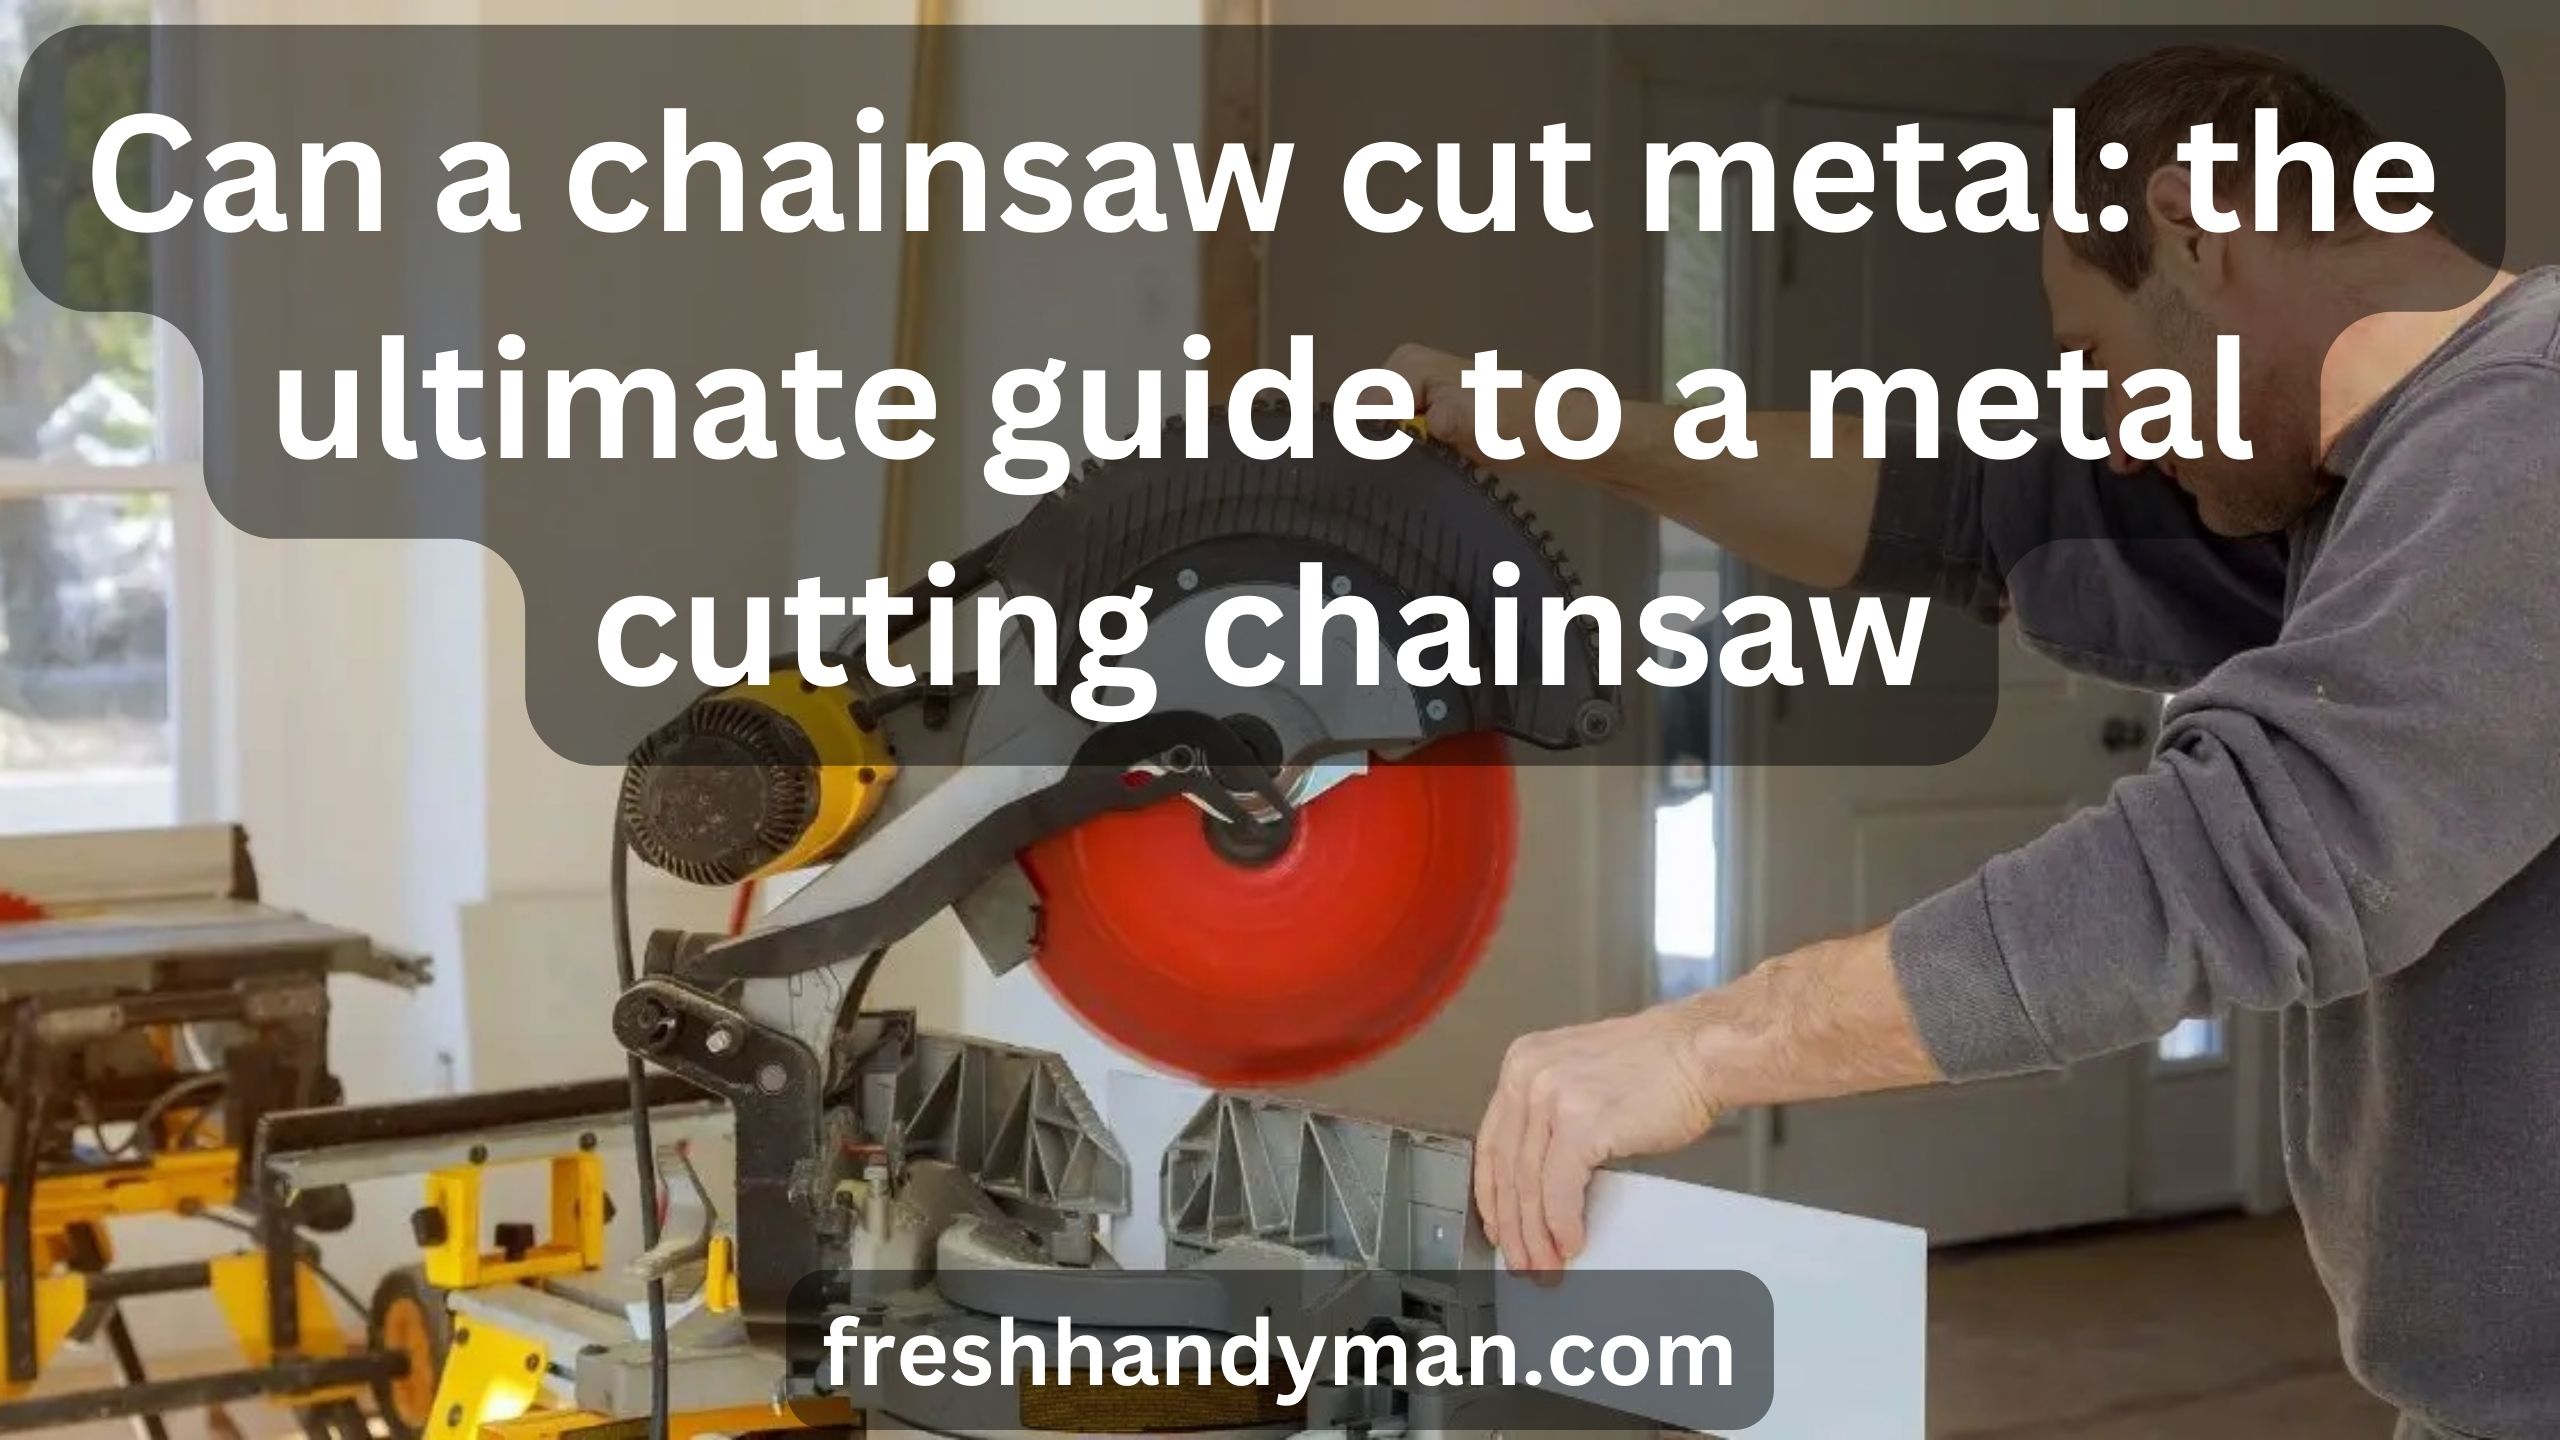 Can a chainsaw cut metal: the ultimate guide to a metal cutting chainsaw